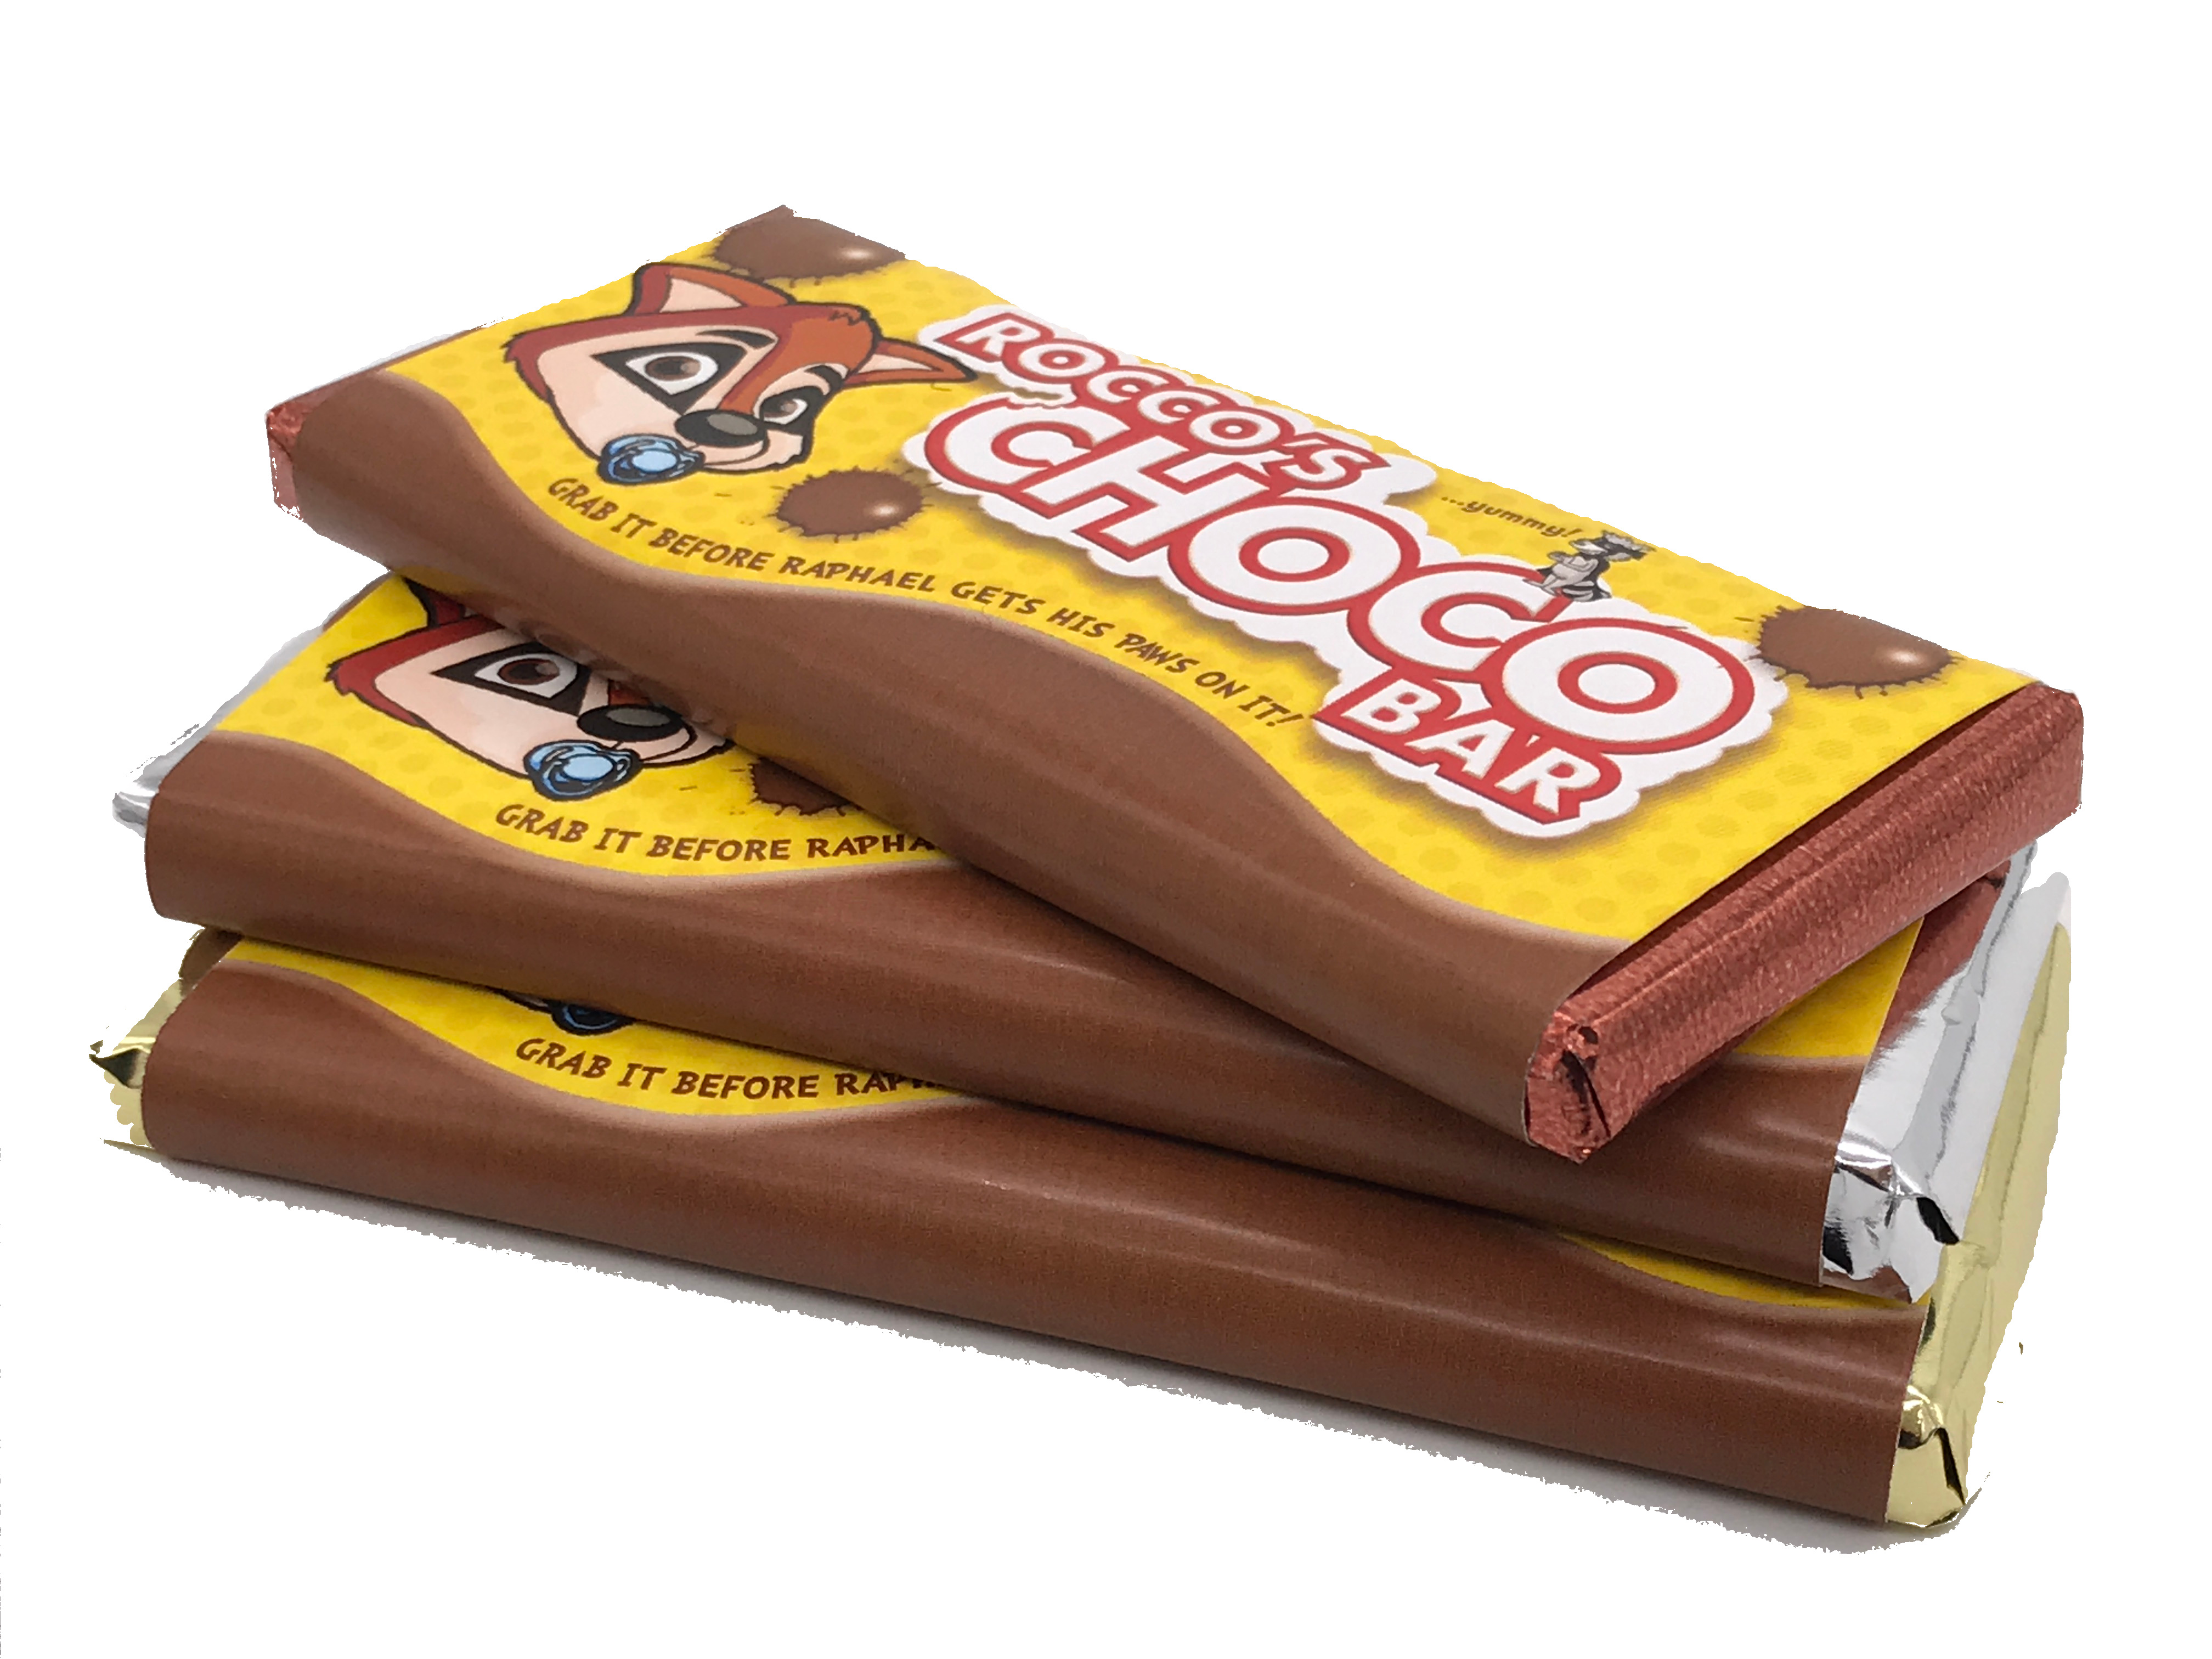 New Candy Bars